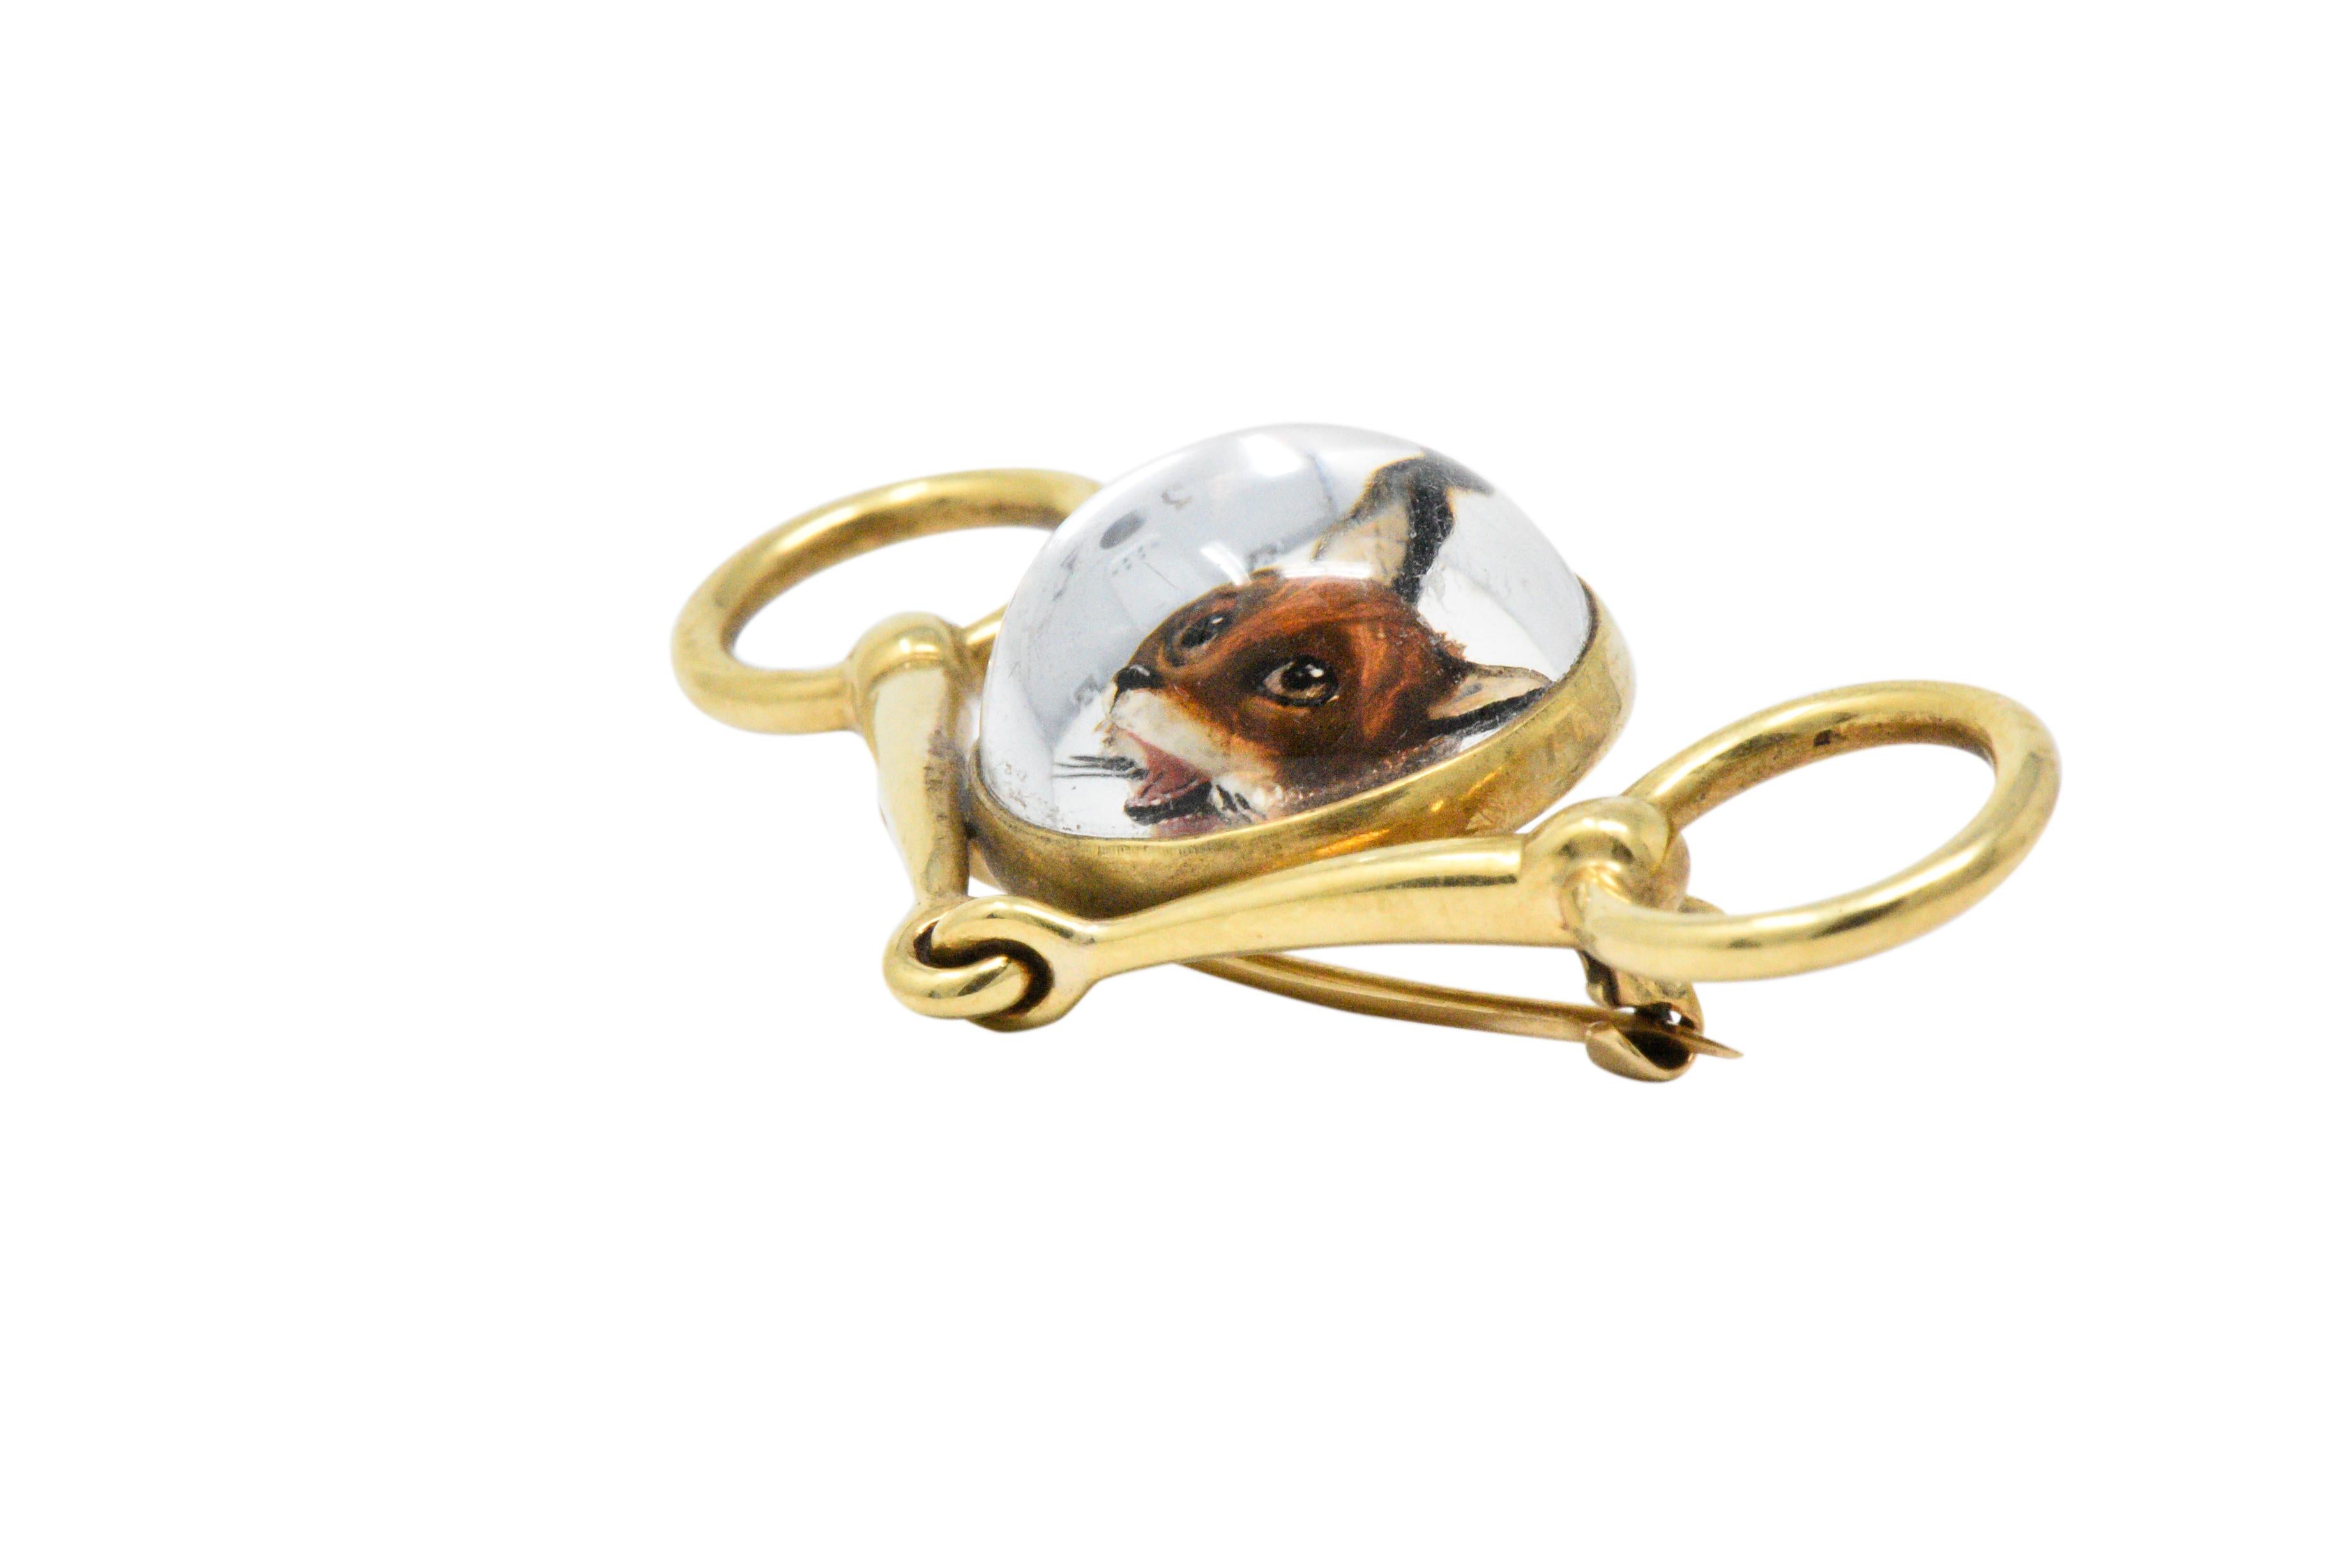 Round cabochon intaglio carved reversed painted crystal depicting the head of a fox backed with mother-of-pearl

Exquisitely detailed, with whiskers, an open mouth with a bright pink tongue and expressive eyes

Polished rich 14k yellow gold snaffle